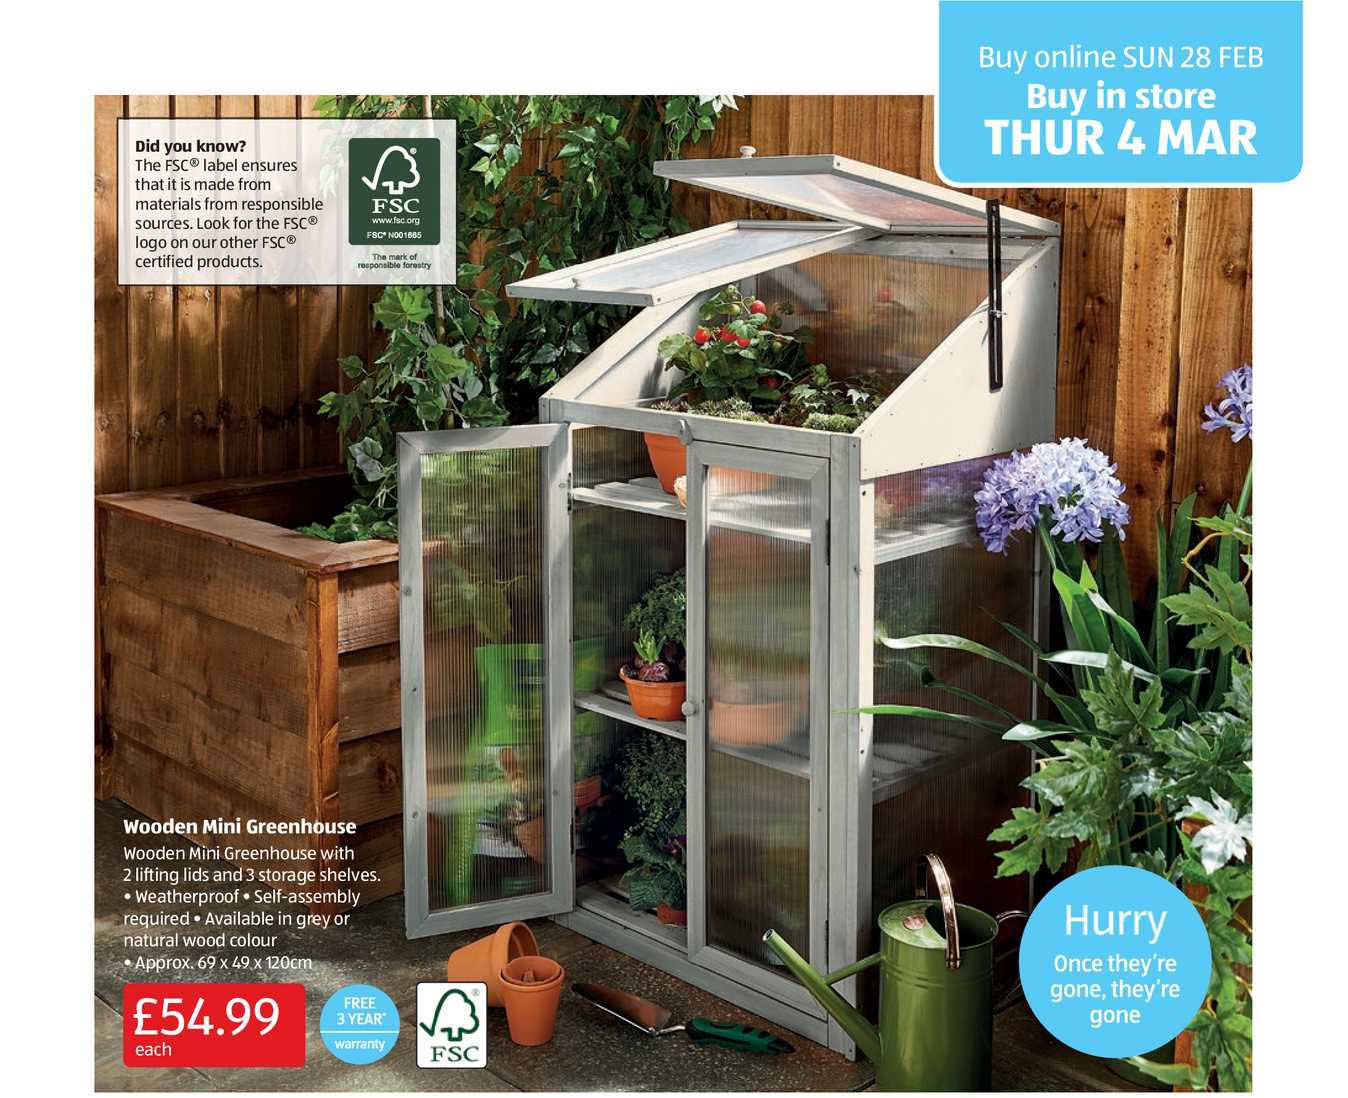 Wooden Mini Greenhouse Offer at Aldi 1Offers.co.uk